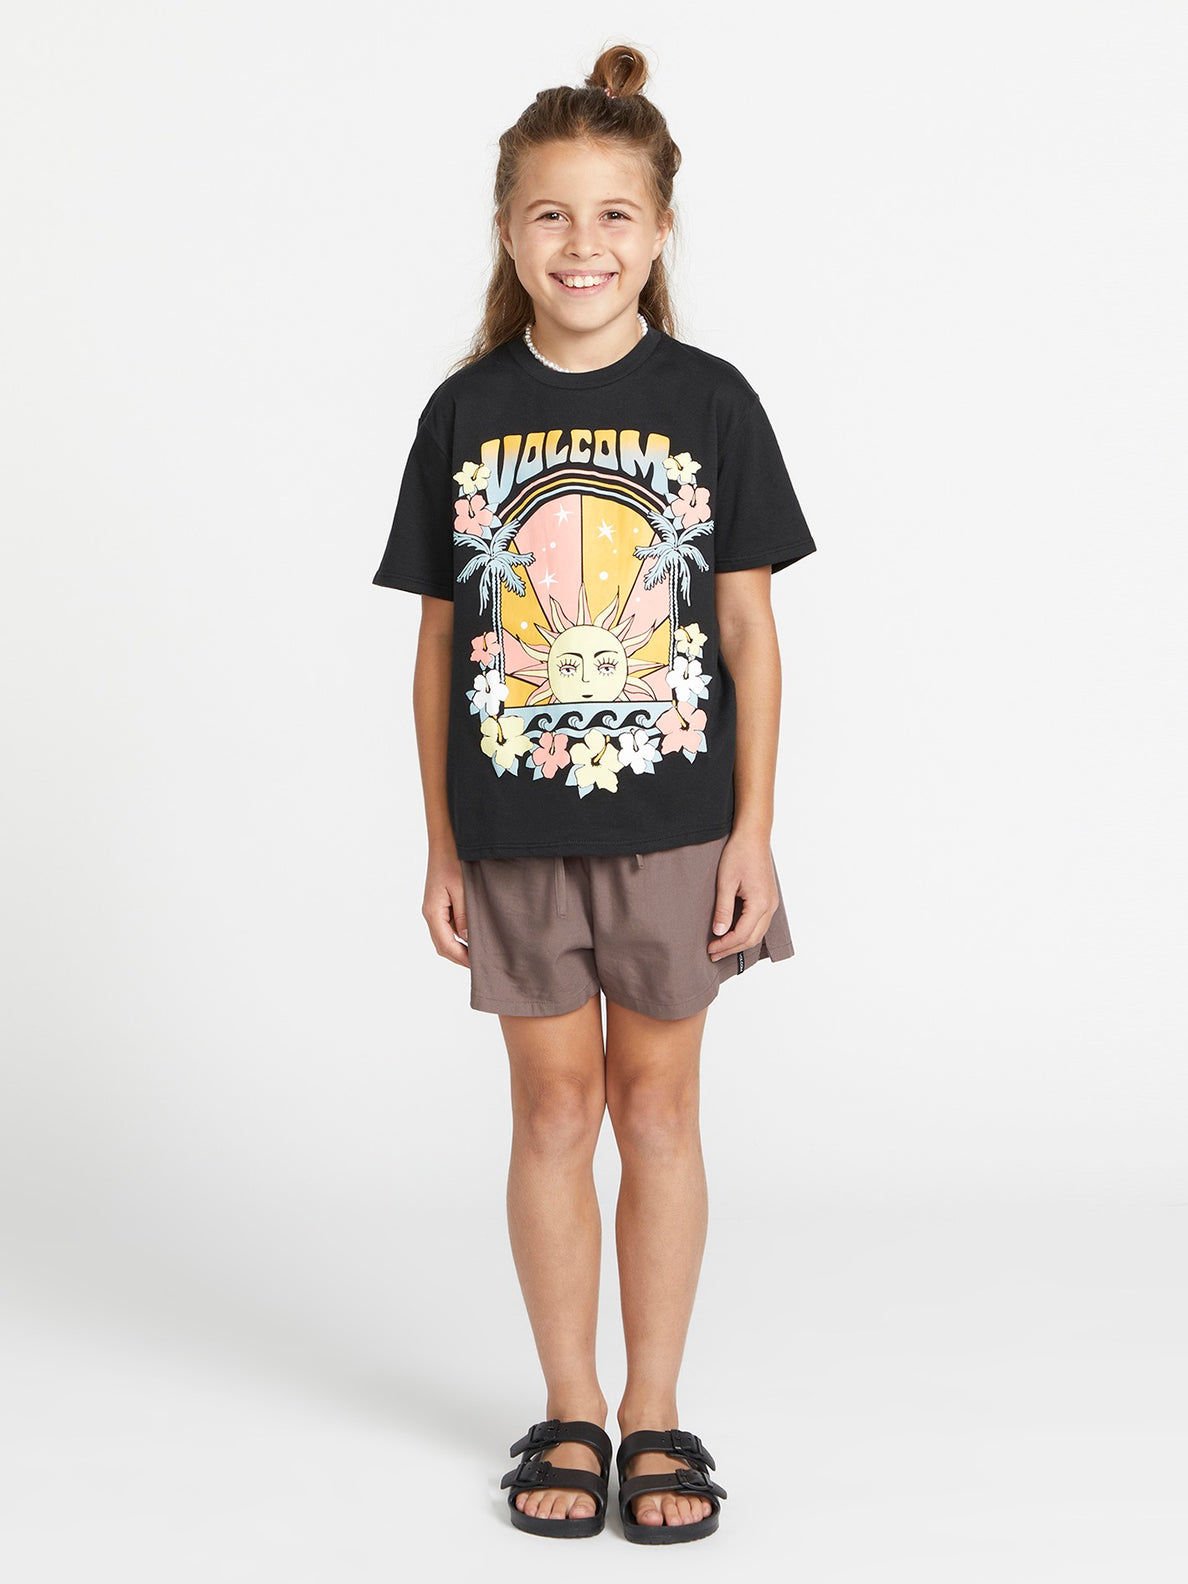 Girls Truly Stoked Bf Tee - Black